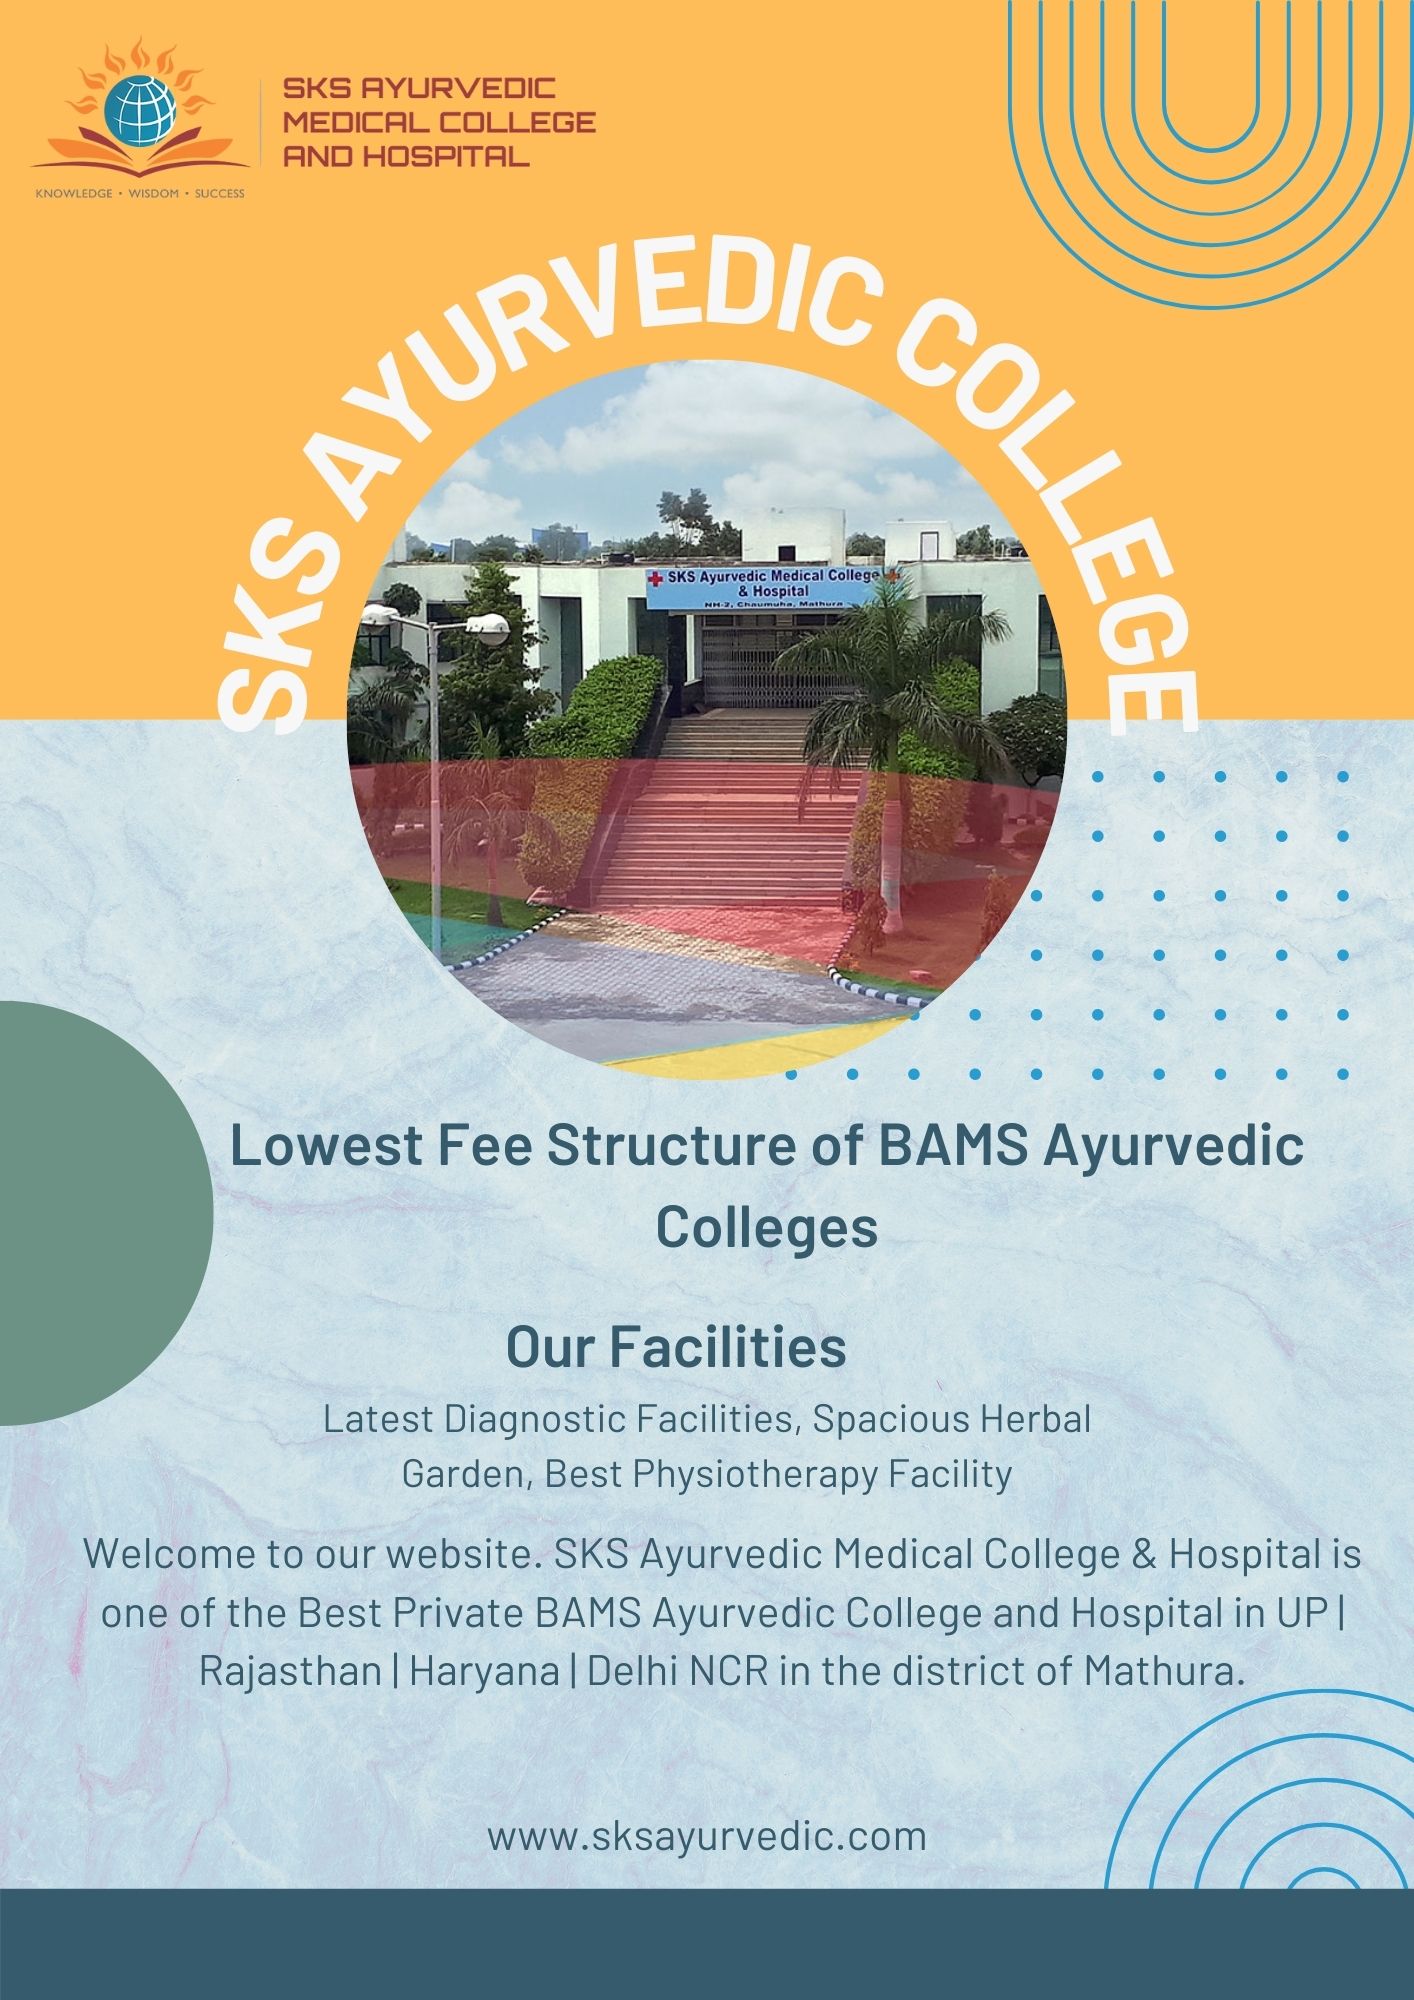 Lowest Fee Structure of BAMS Ayurvedic Colleges